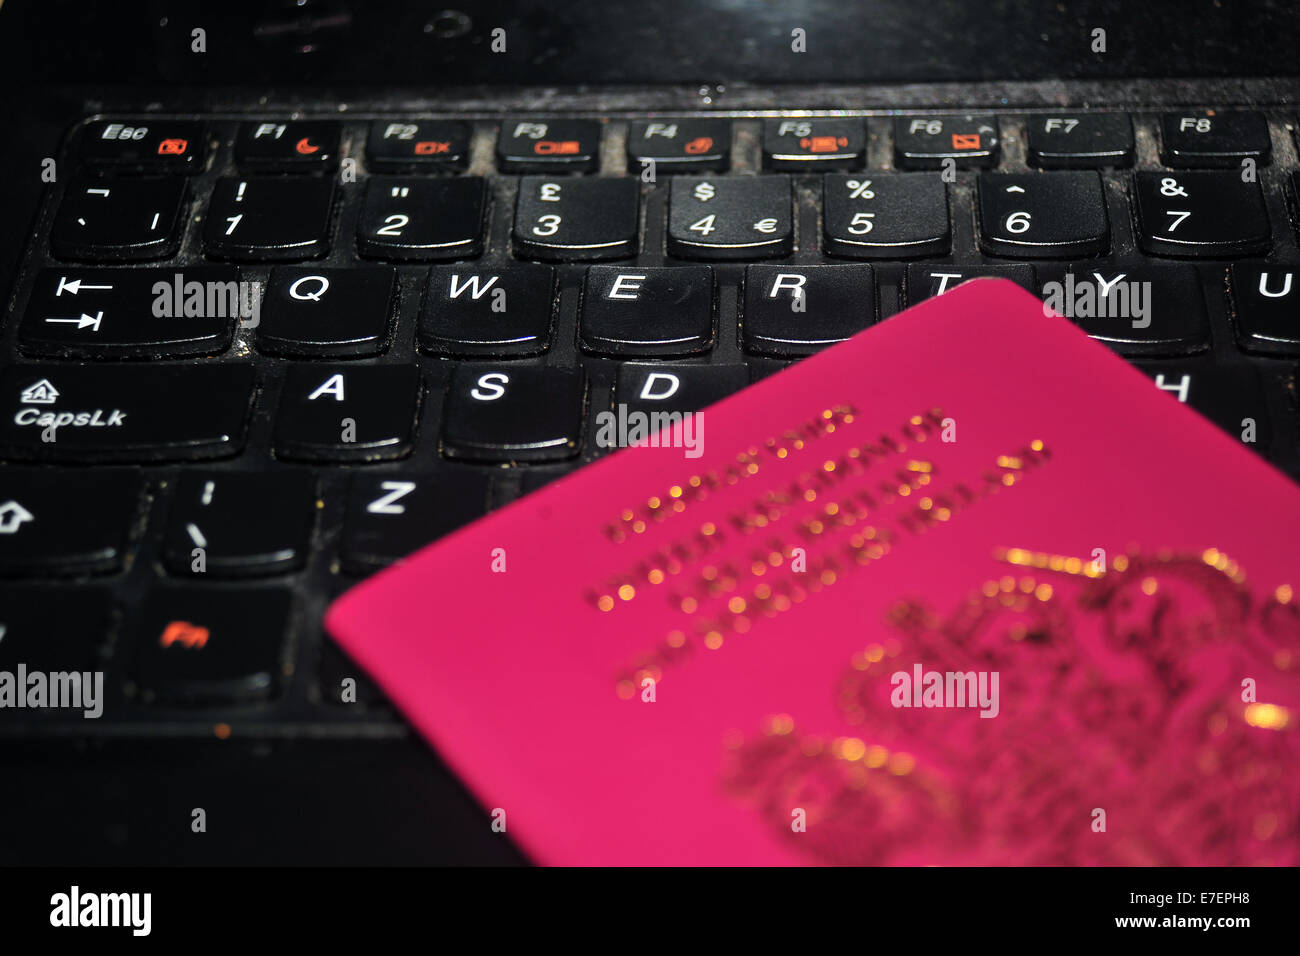 Image of a 2010 British passport photographed against a computer keyboard Stock Photo